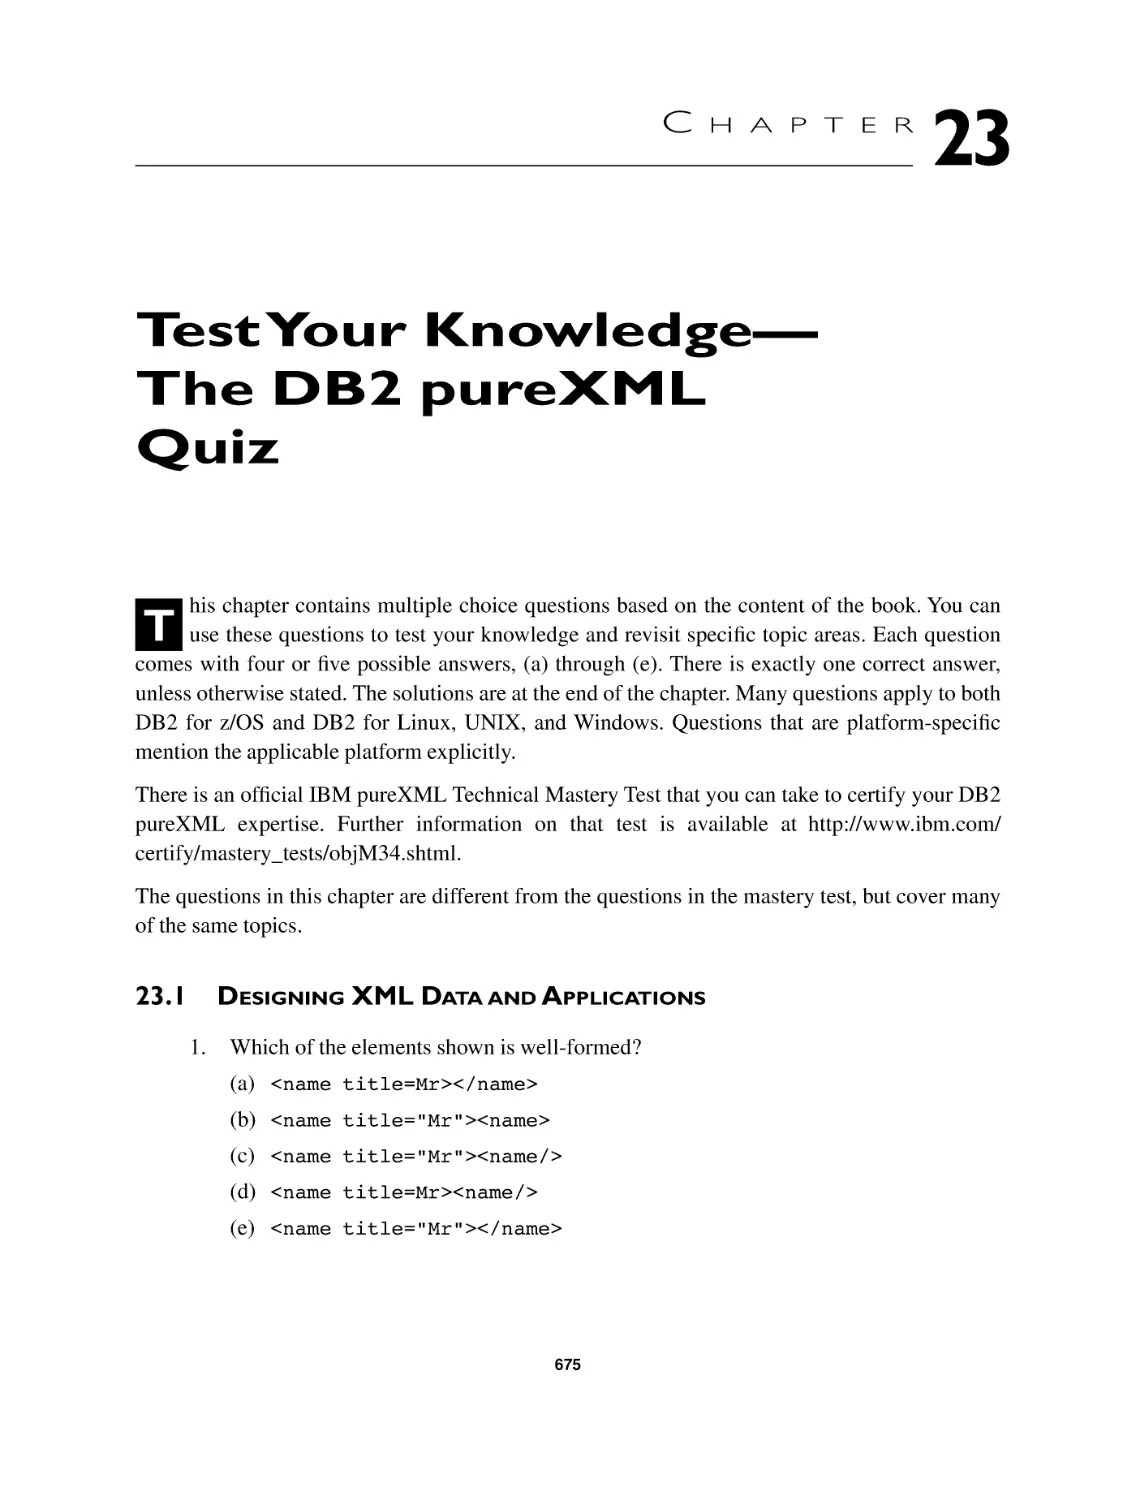 Chapter 23 Test Your Knowledge—The DB2 pureXML Quiz
23.1 Designing XML Data and Applications